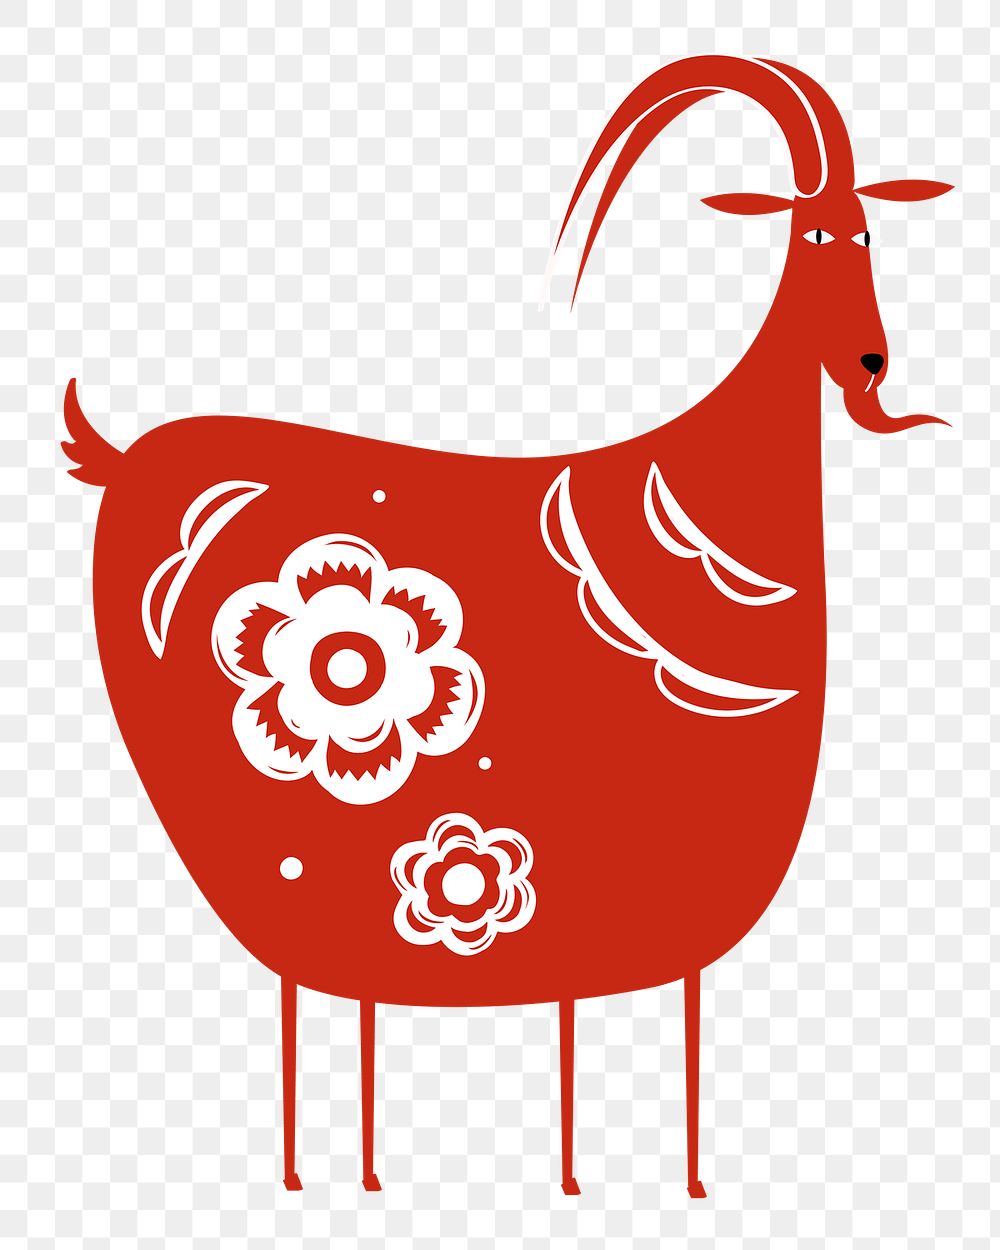 Goat classic red png Chinese zodiac sign design element